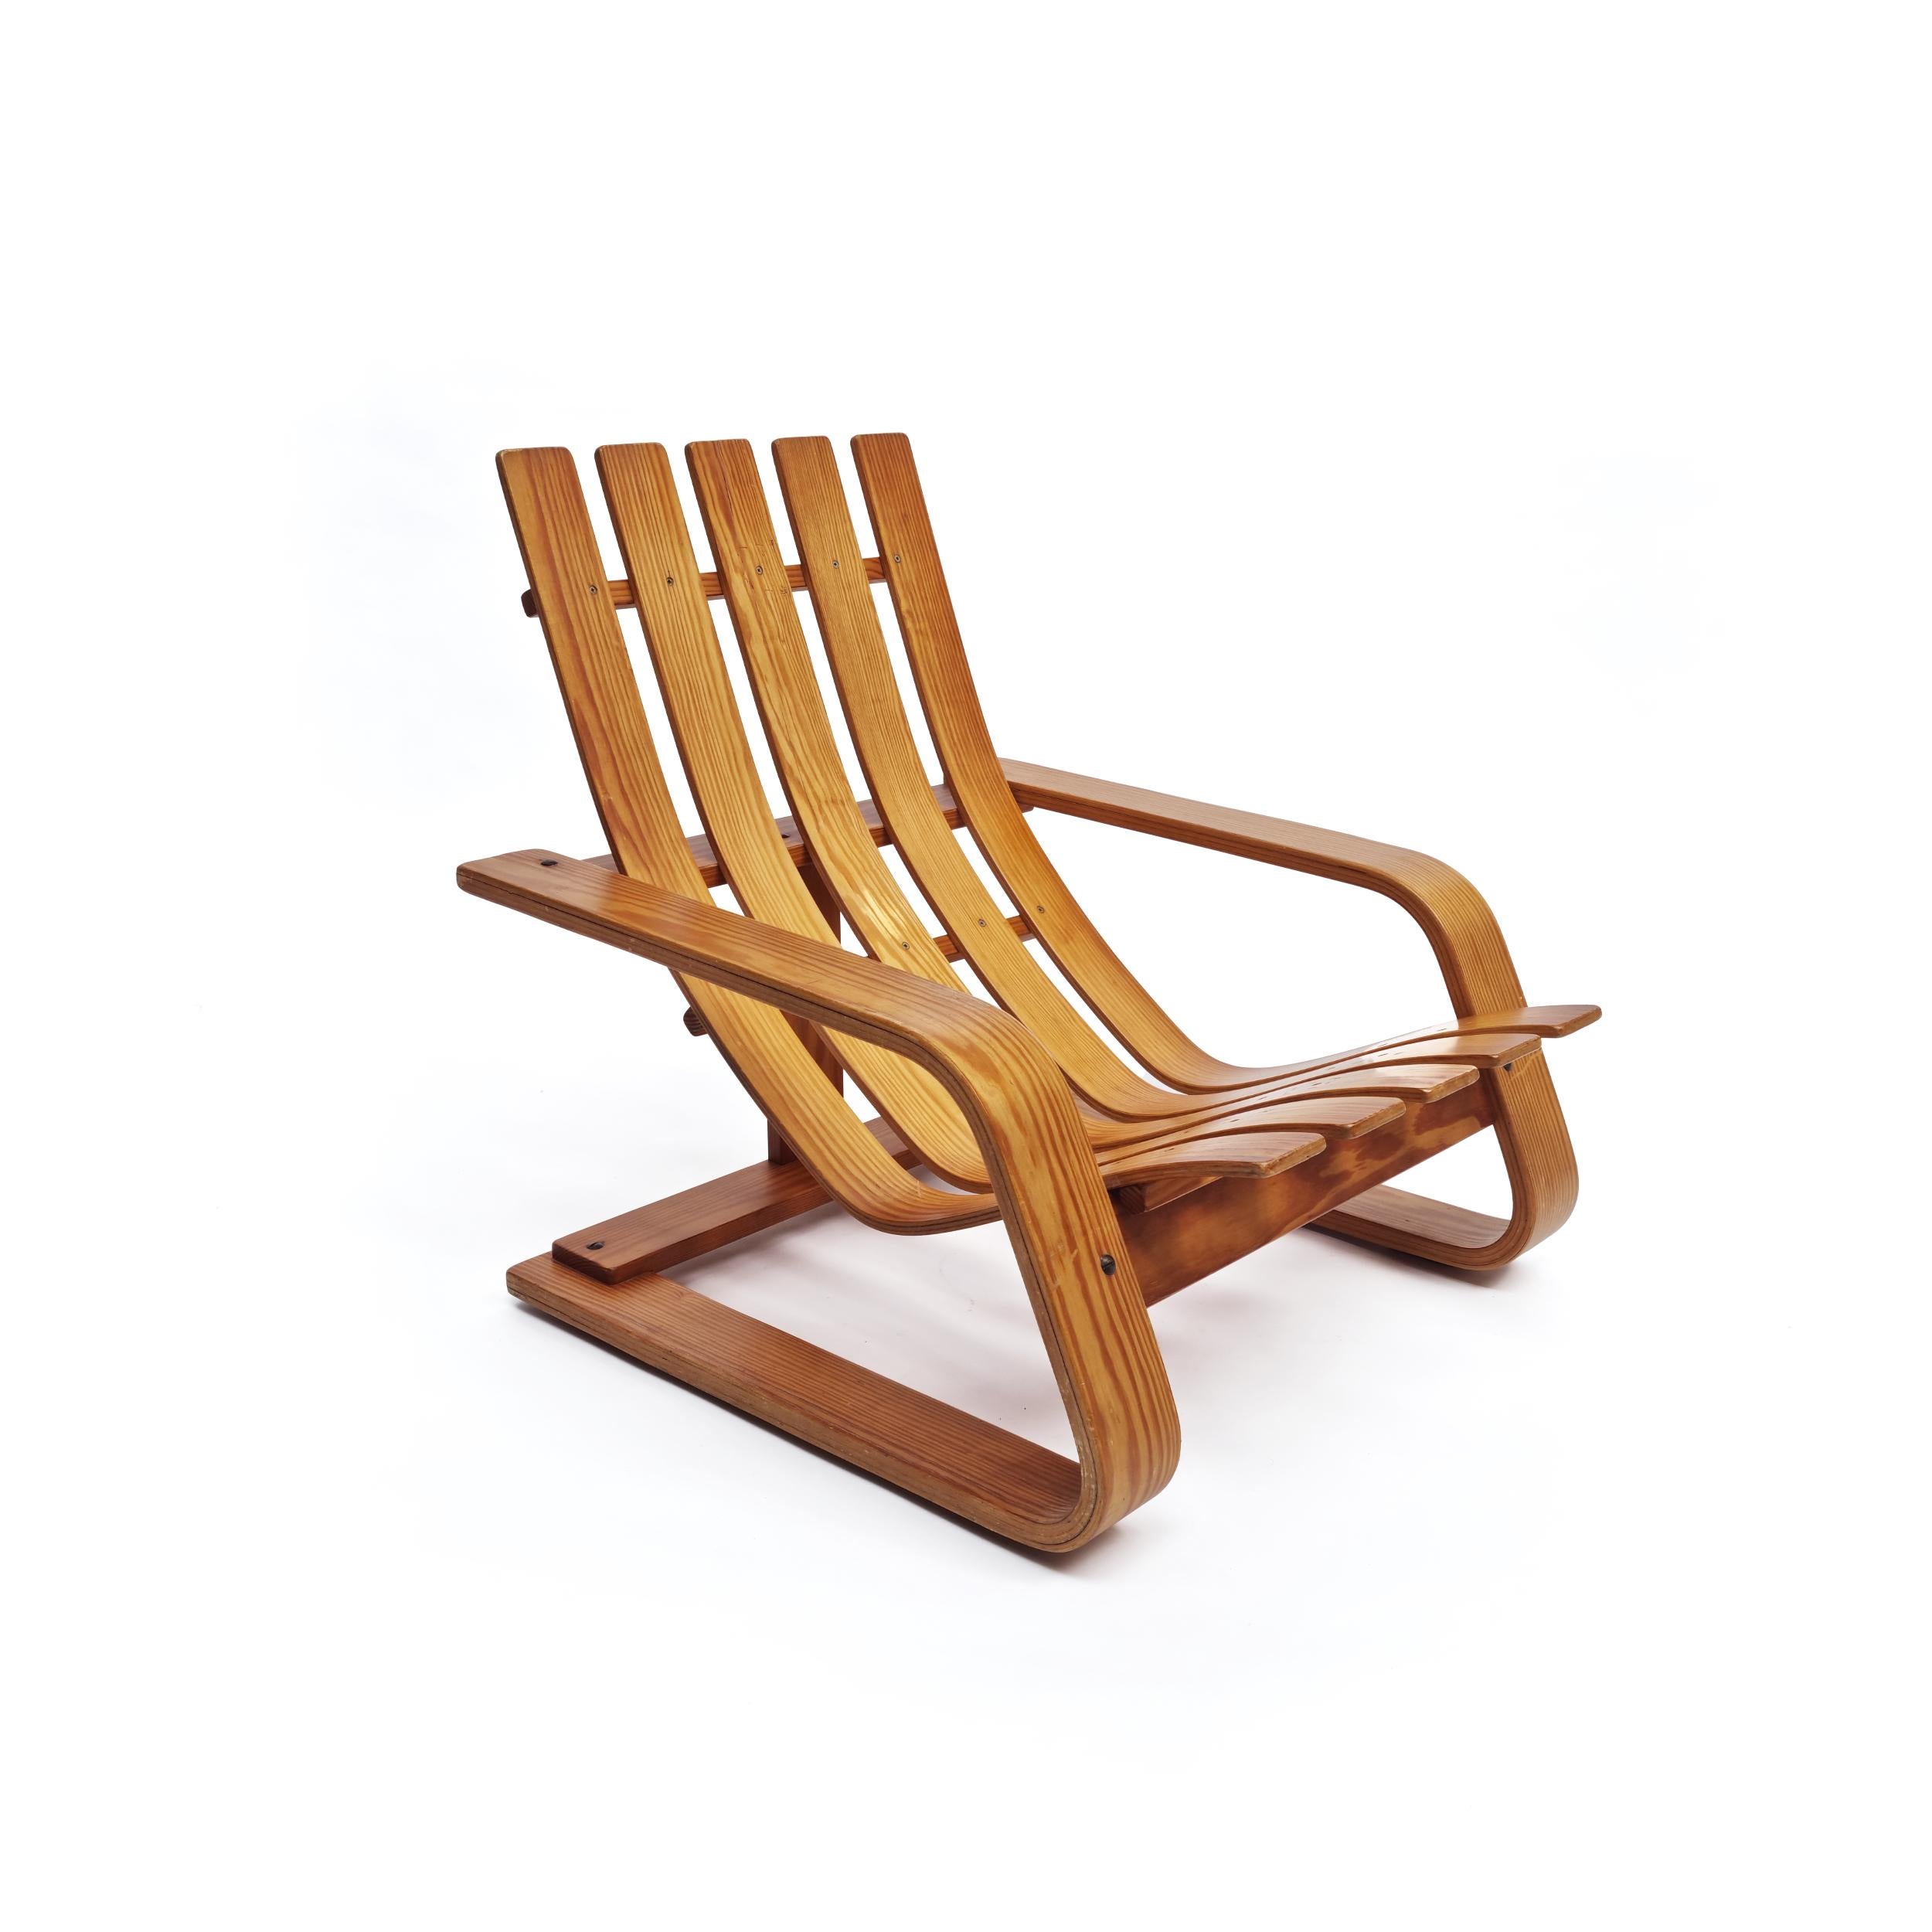 Lounge chair in solid pine. Made in Norway. Great original condition.